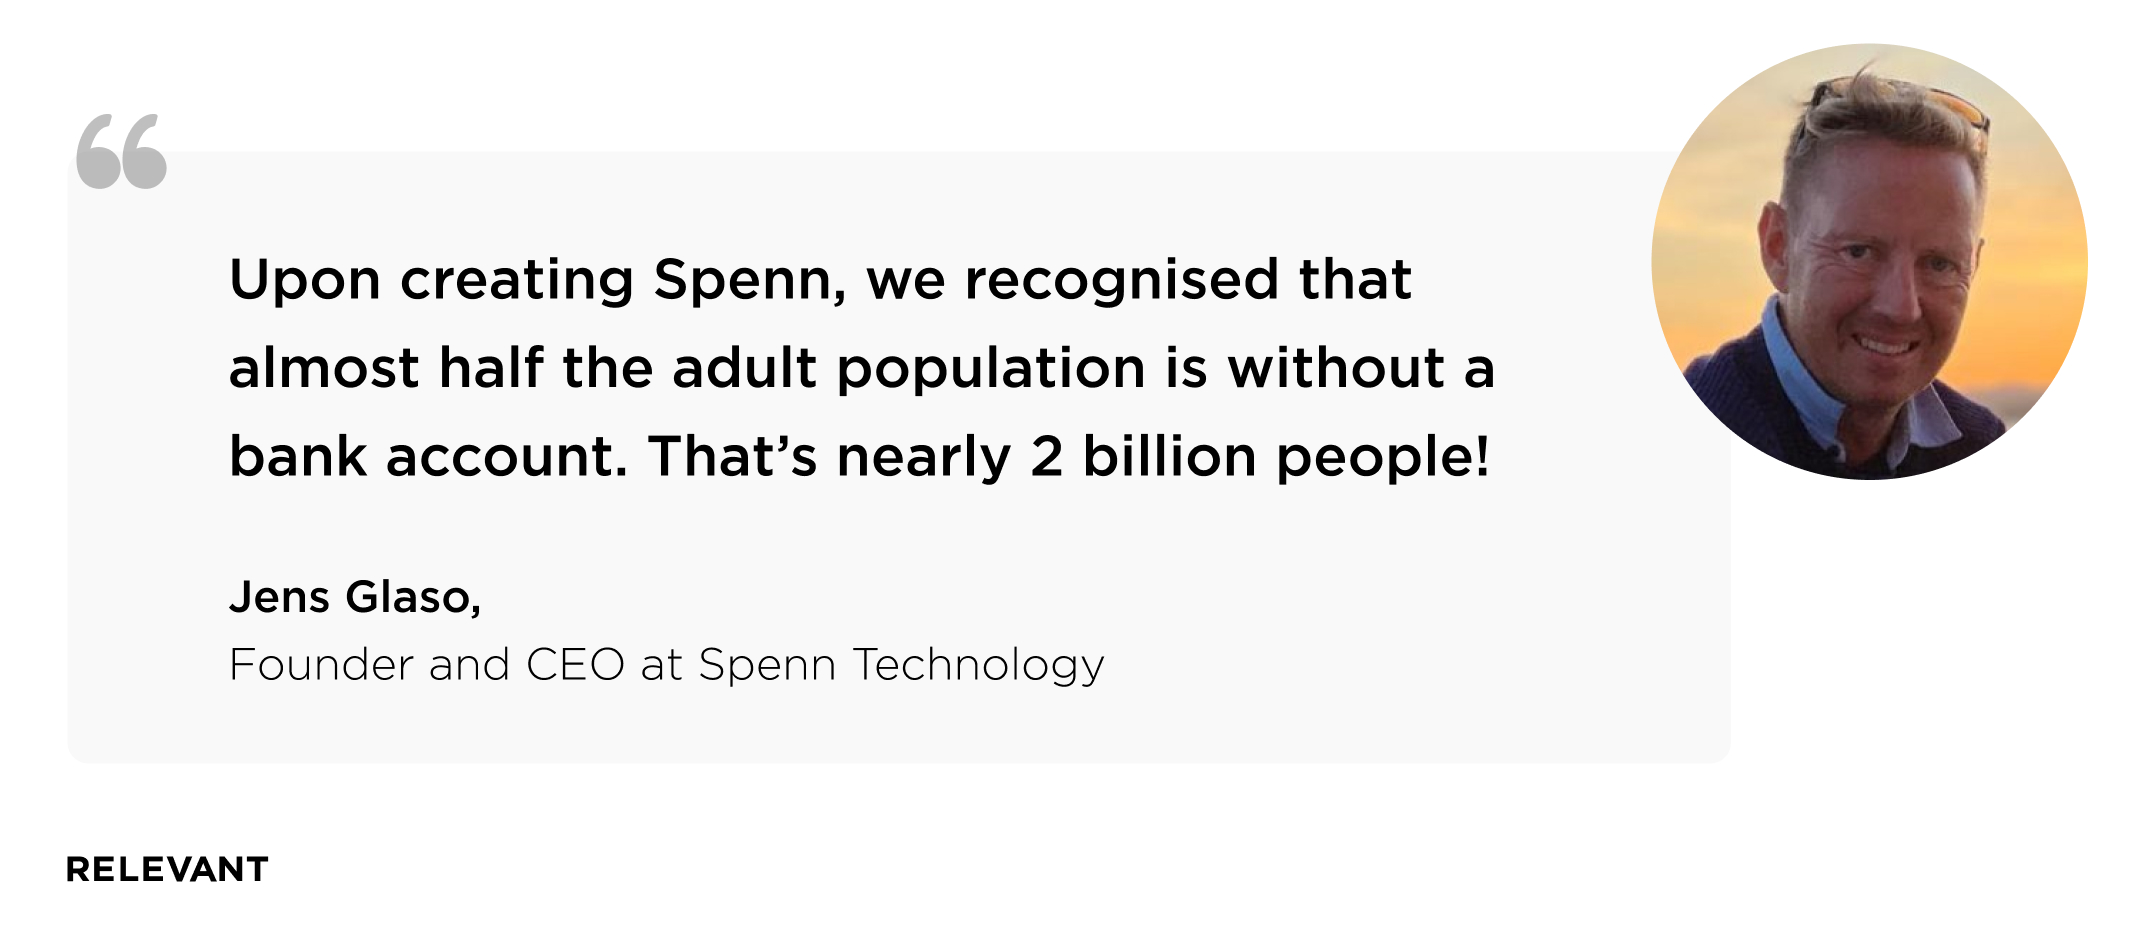 Jens Glaso,  Founder and CEO
at Spenn Technology 